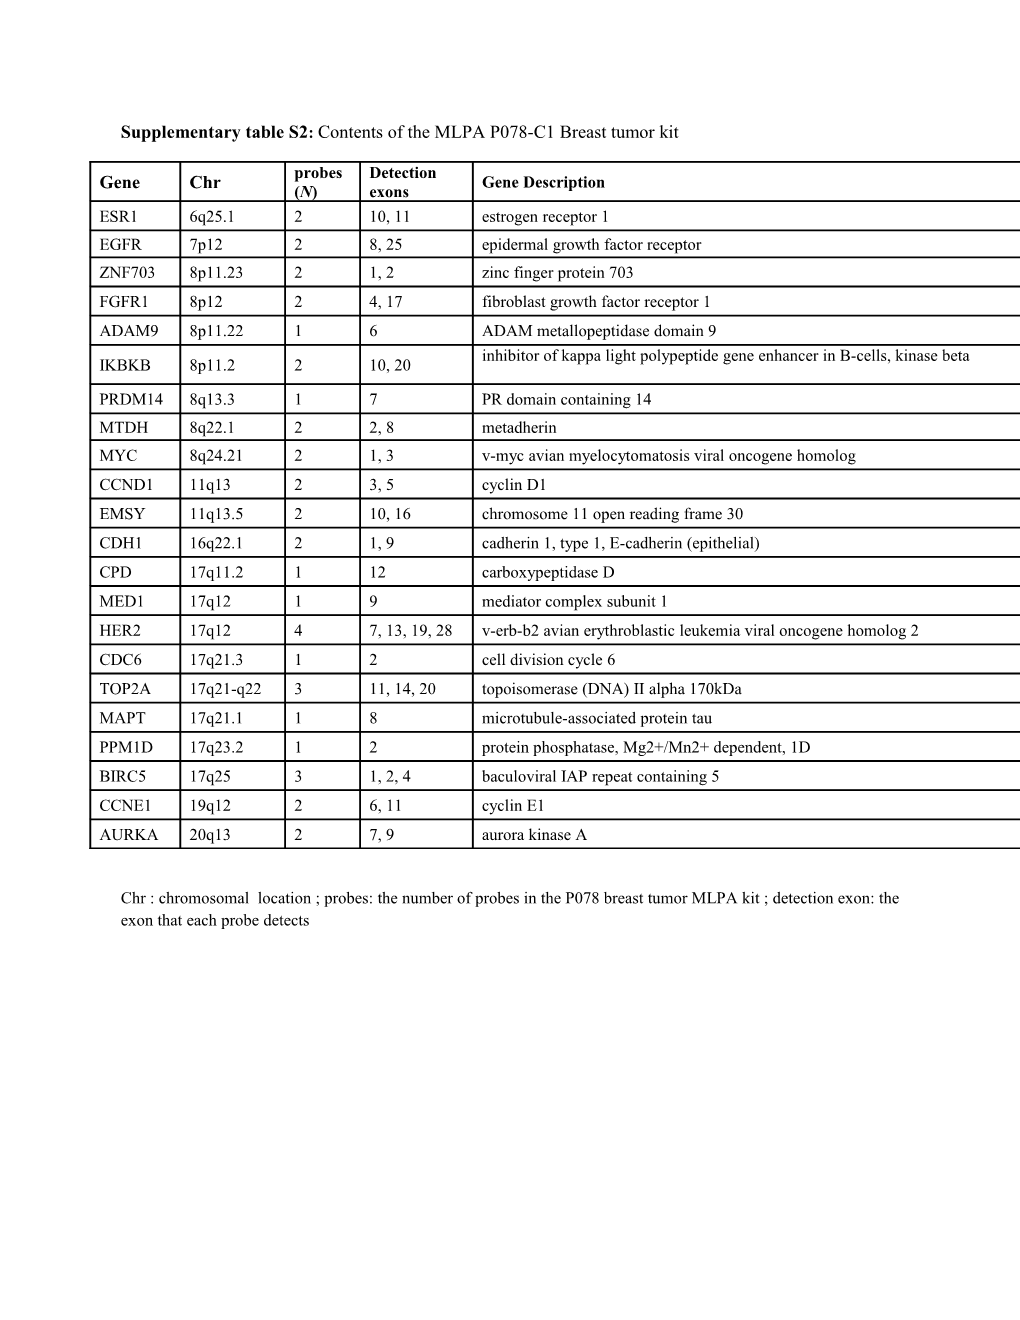 Supplementary Table S2: Contents of the MLPA P078-C1 Breast Tumor Kit